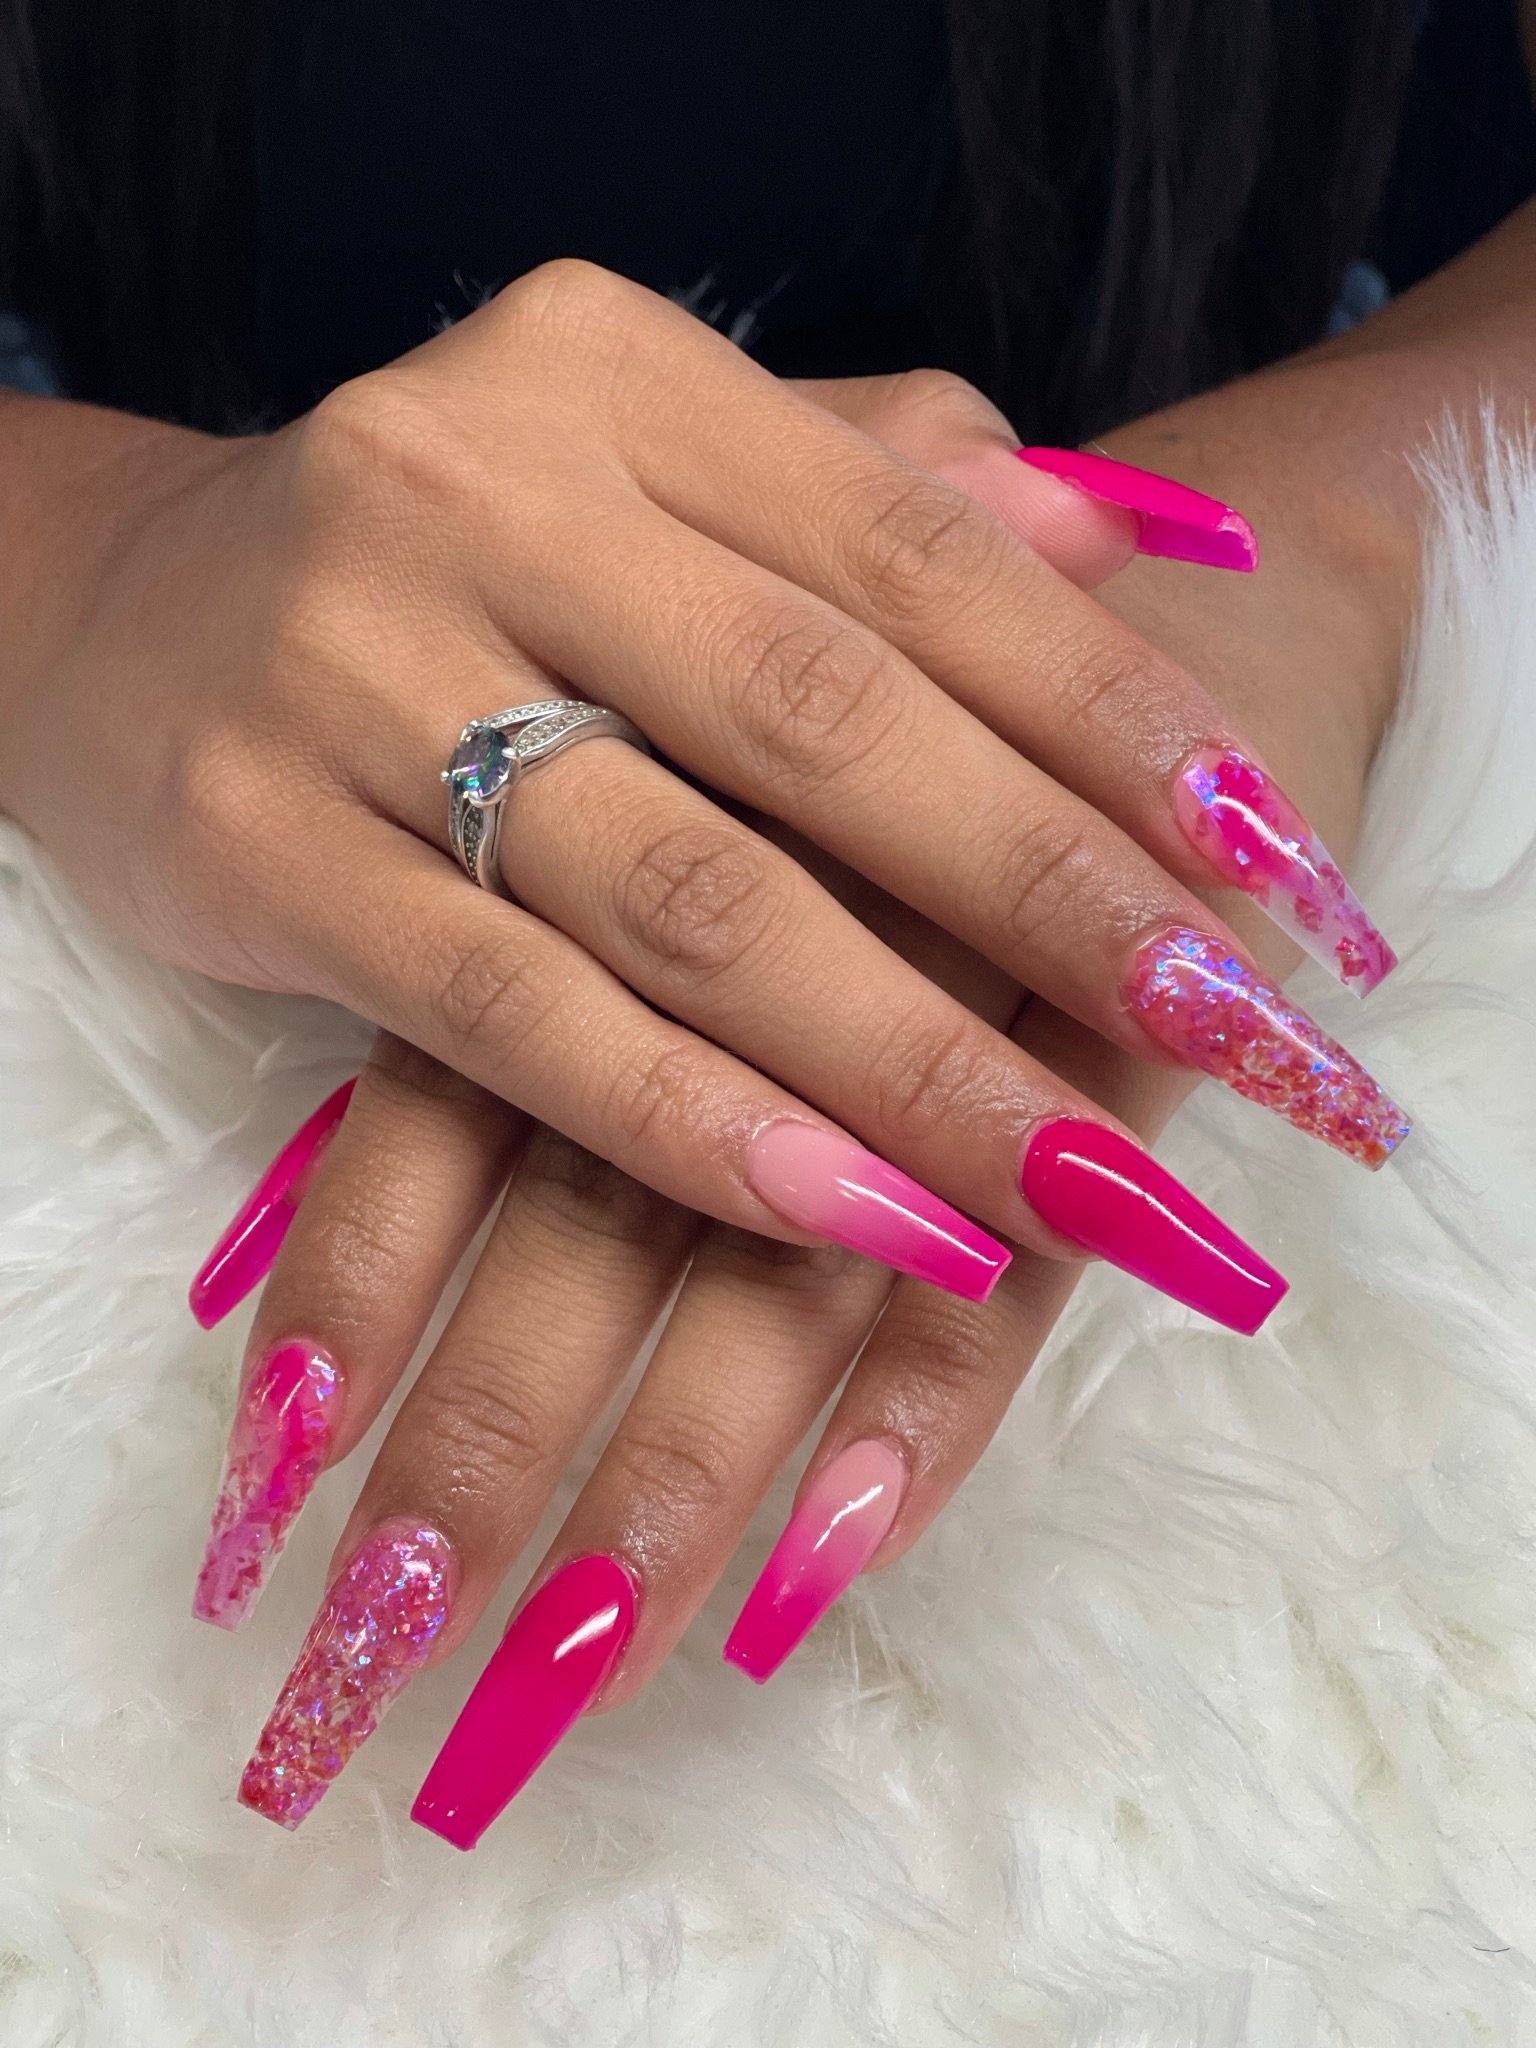 Our Services | Camellia 66 Nails of Medford, Massachusetts 02155 | Manicure,  Pedicure, Enhancement, Dipping, Gel Powder, Kid Nail, Waxing